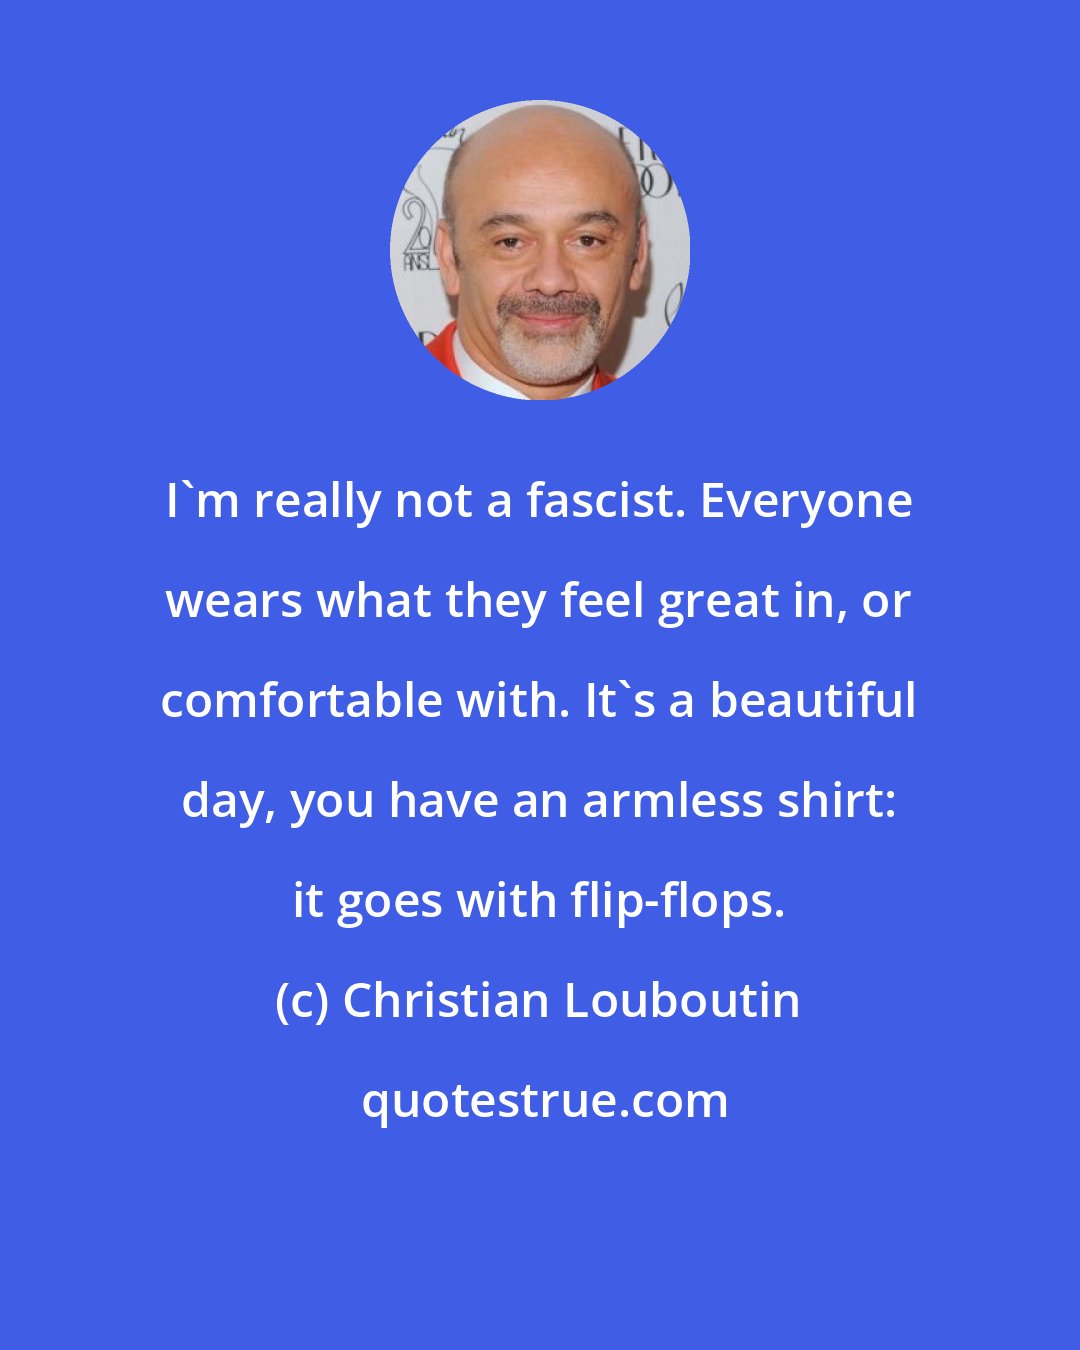 Christian Louboutin: I'm really not a fascist. Everyone wears what they feel great in, or comfortable with. It's a beautiful day, you have an armless shirt: it goes with flip-flops.